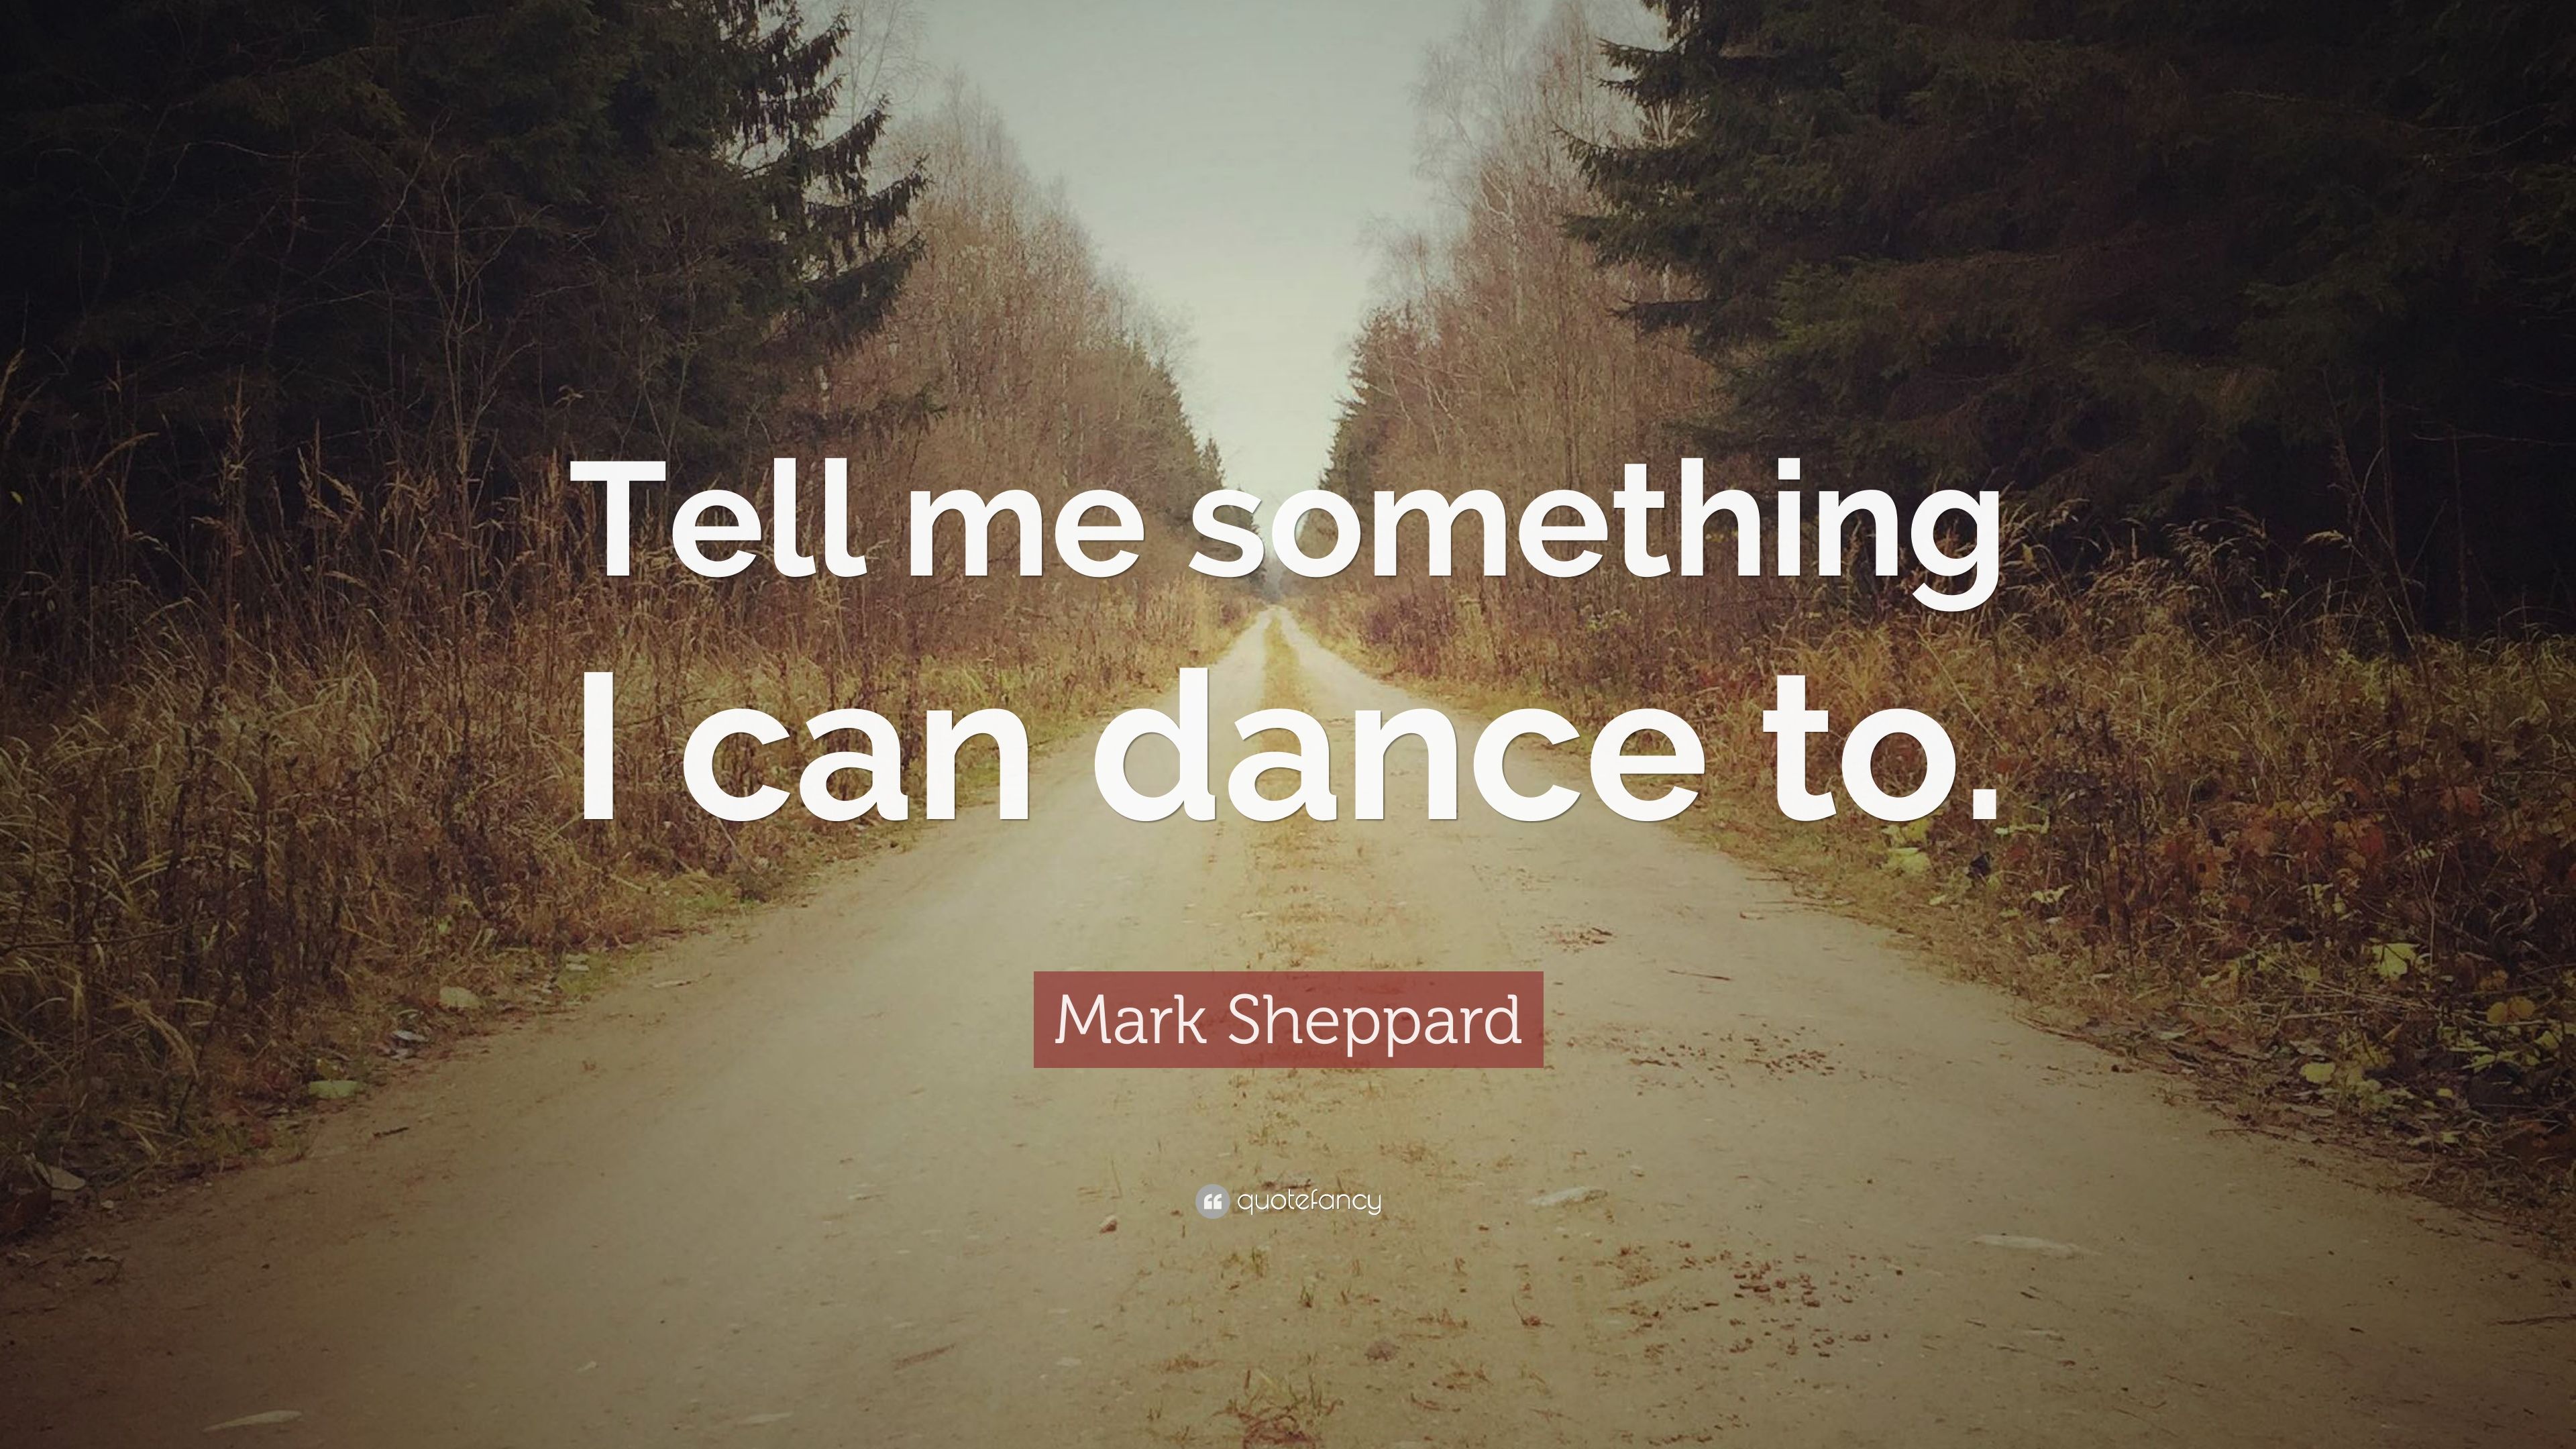 Mark Sheppard Quote: “Tell me something I can dance to.” 7